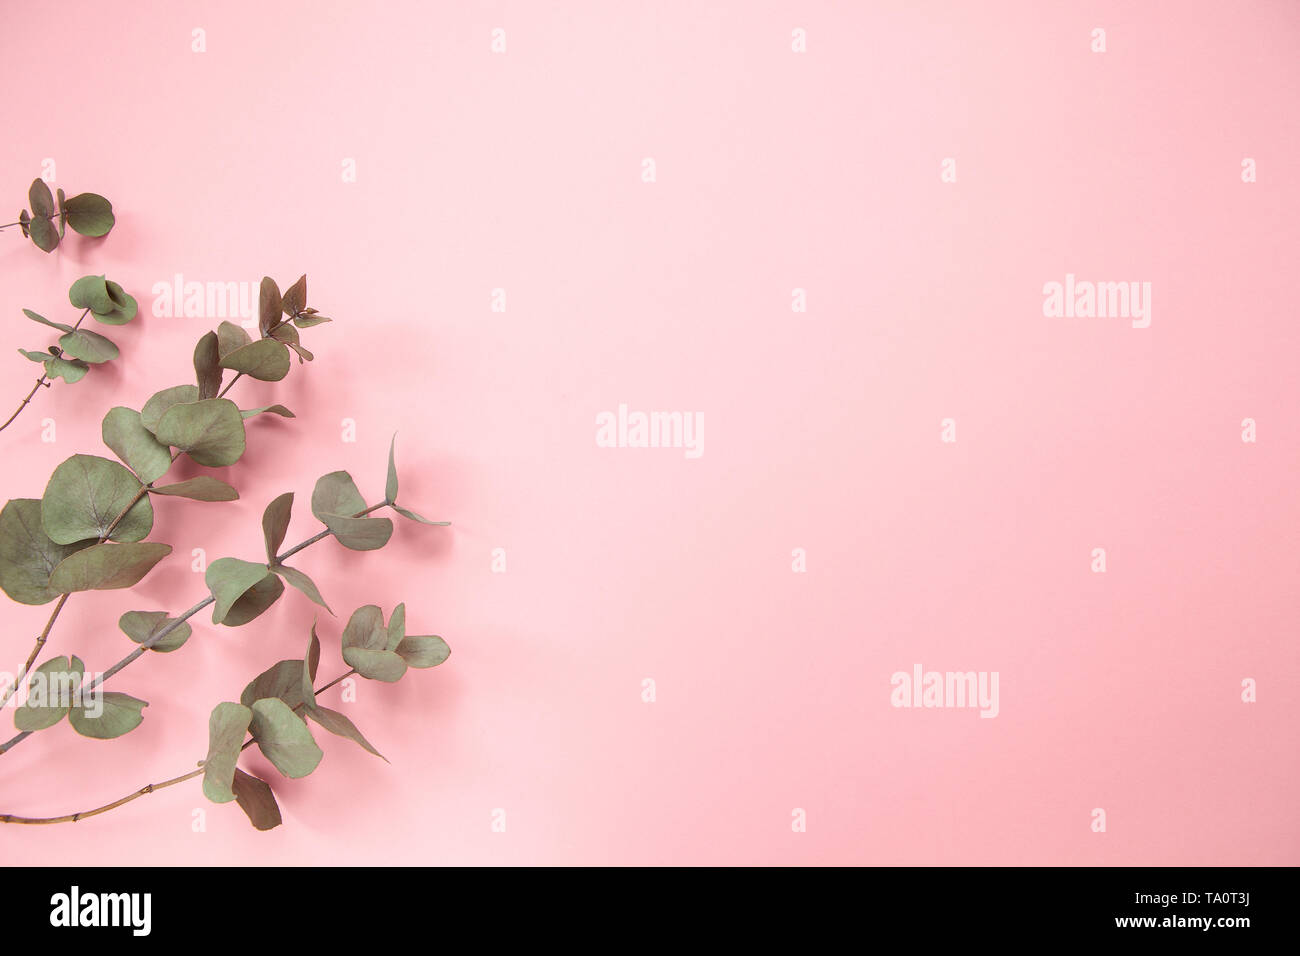 Eucalyptus branches on millennial pink background. Flat lay. Copy space. Stock Photo